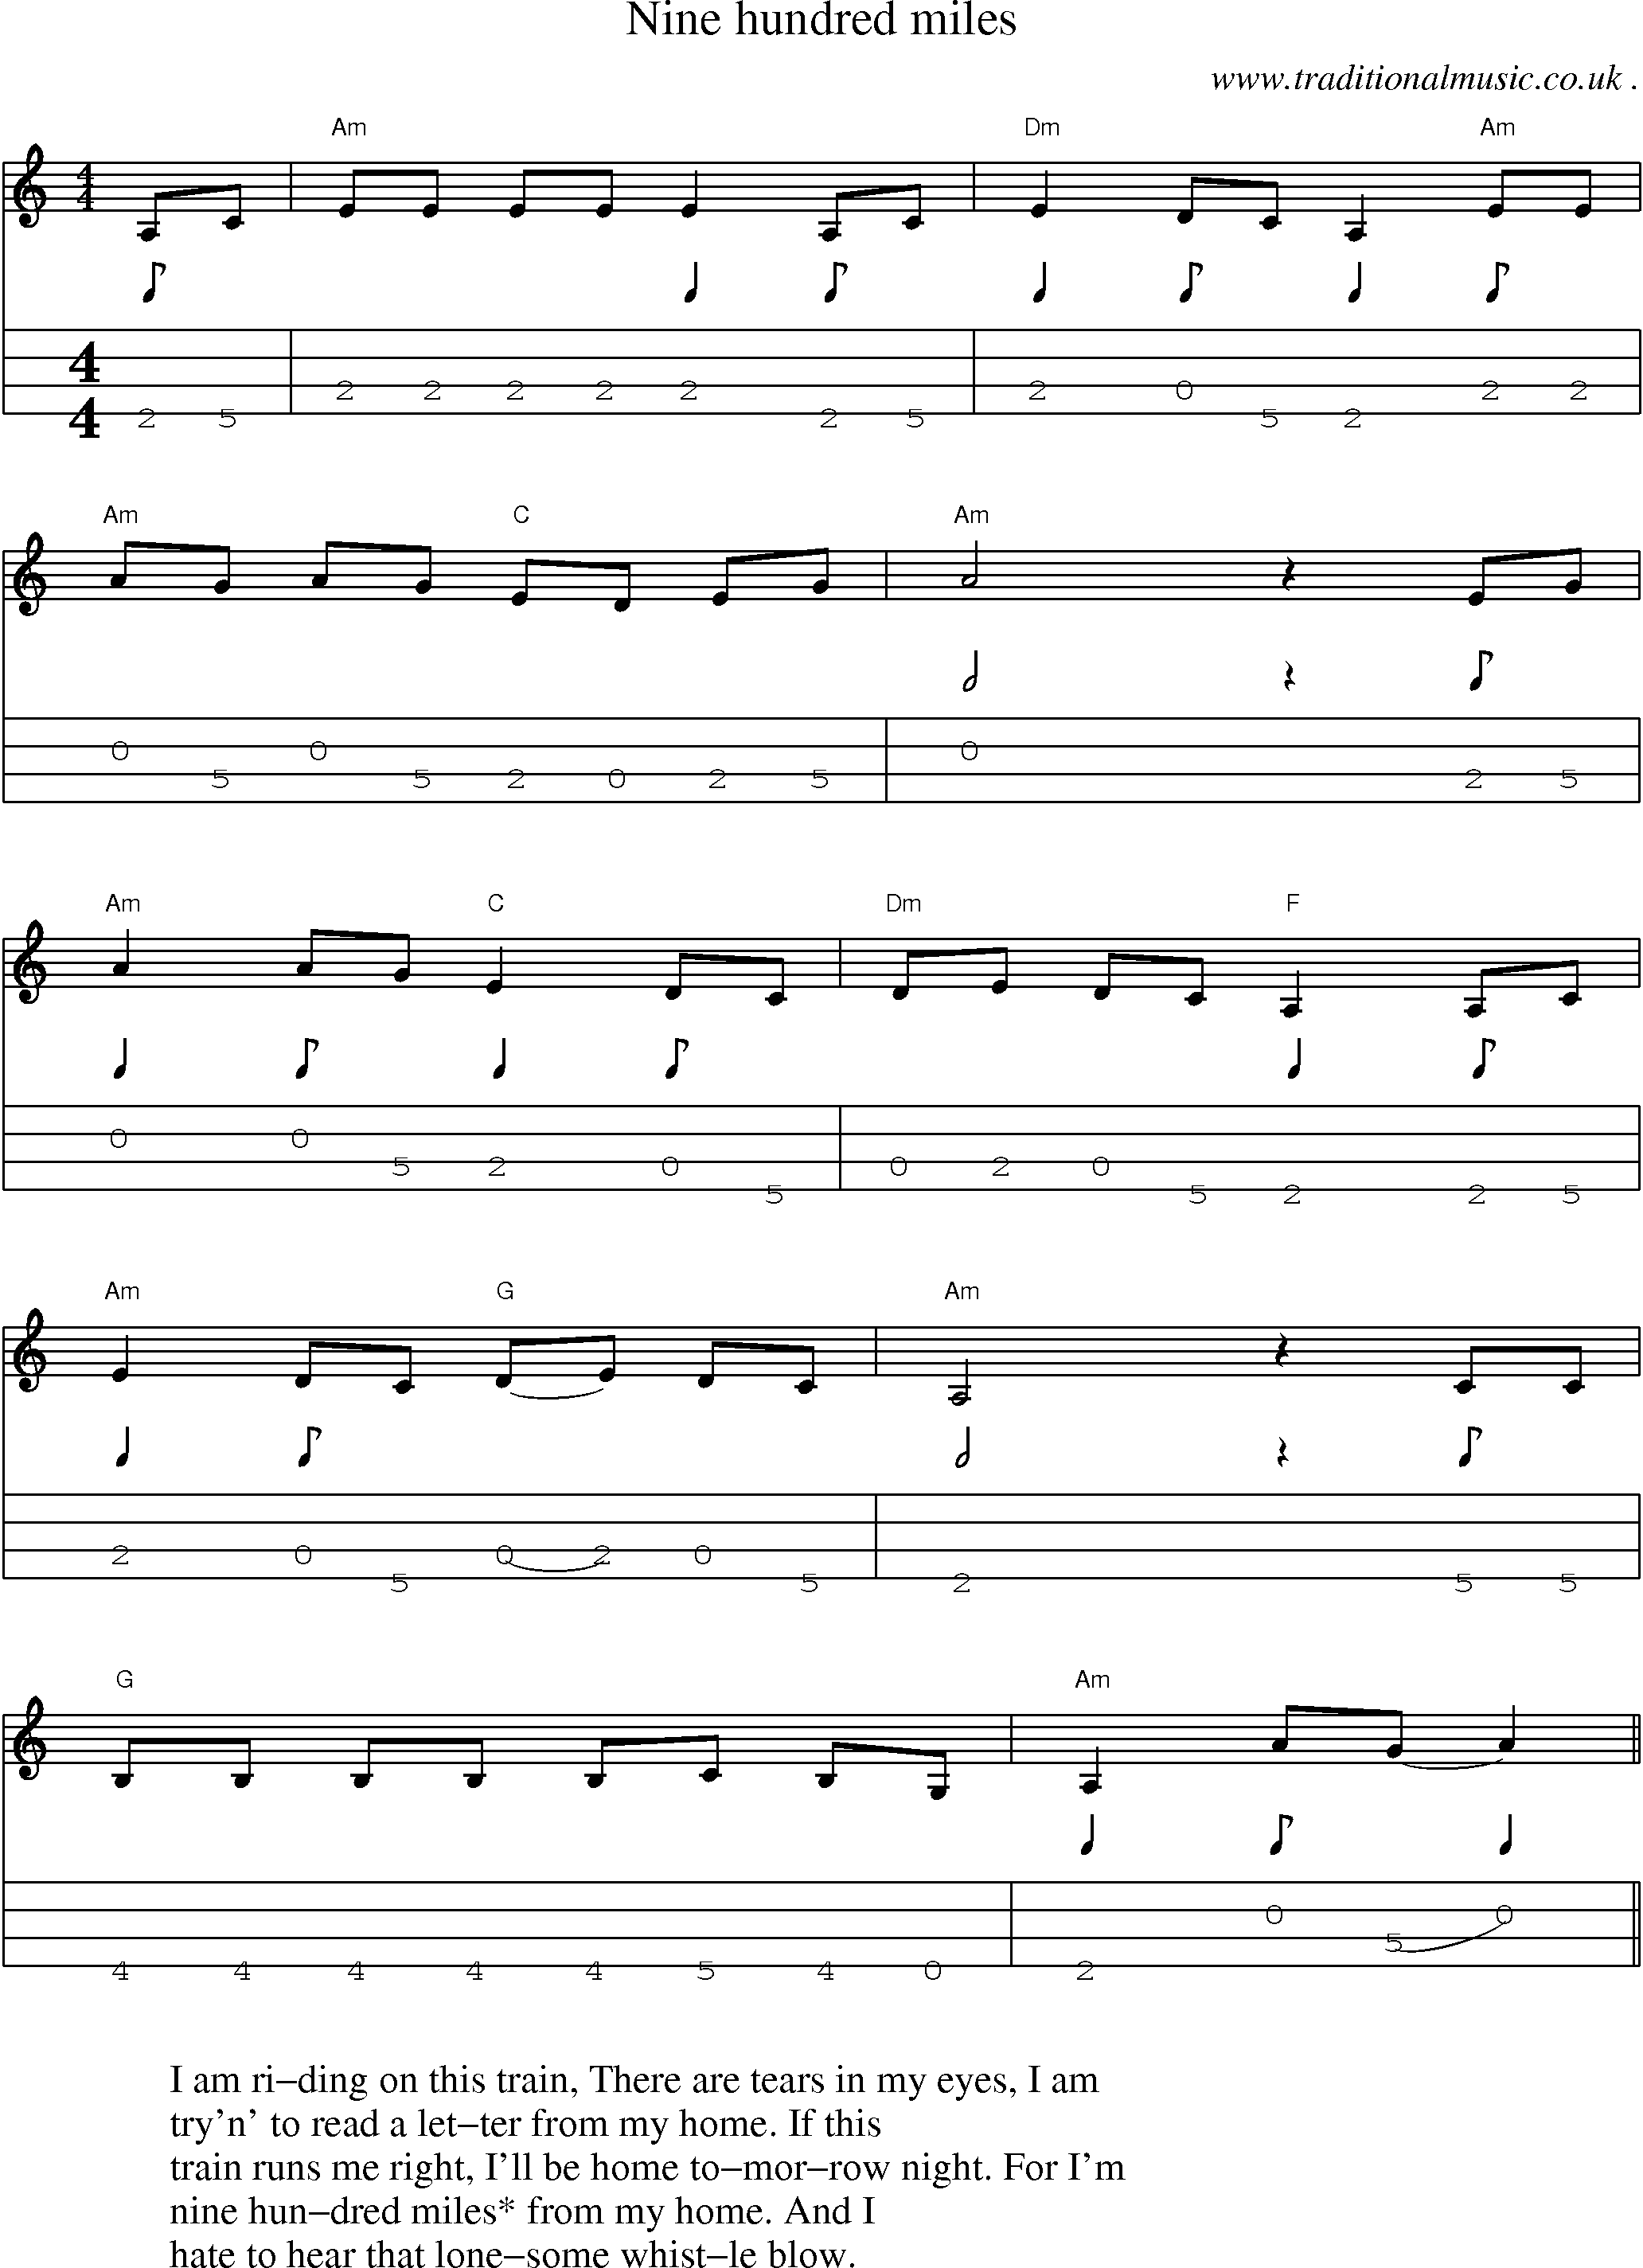 Music Score and Mandolin Tabs for Nine Hundred Miles